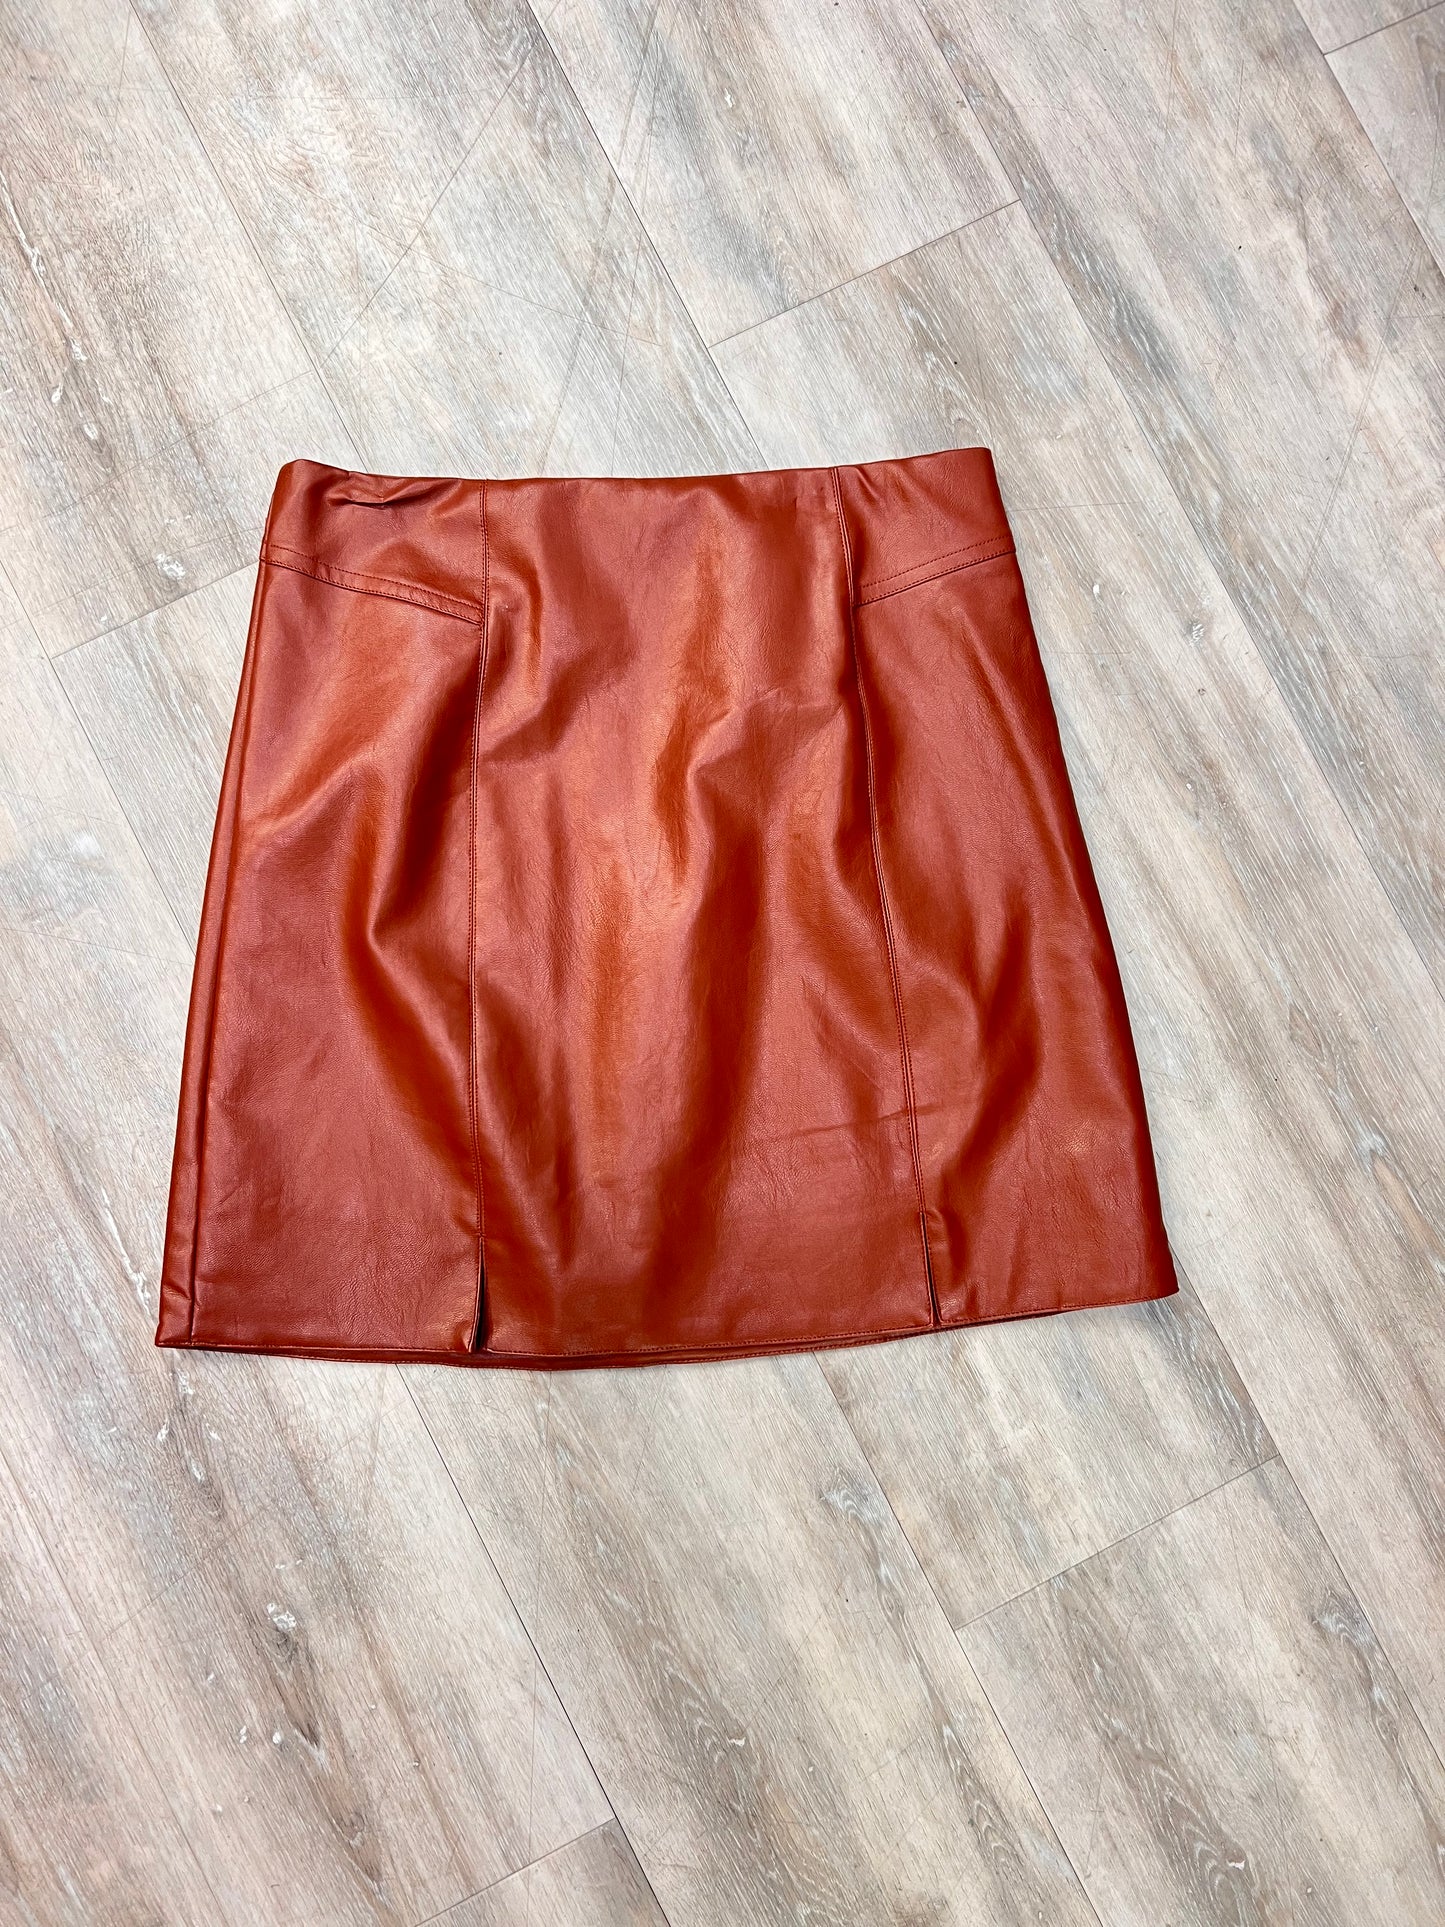 Rust Brown Leather Skirt